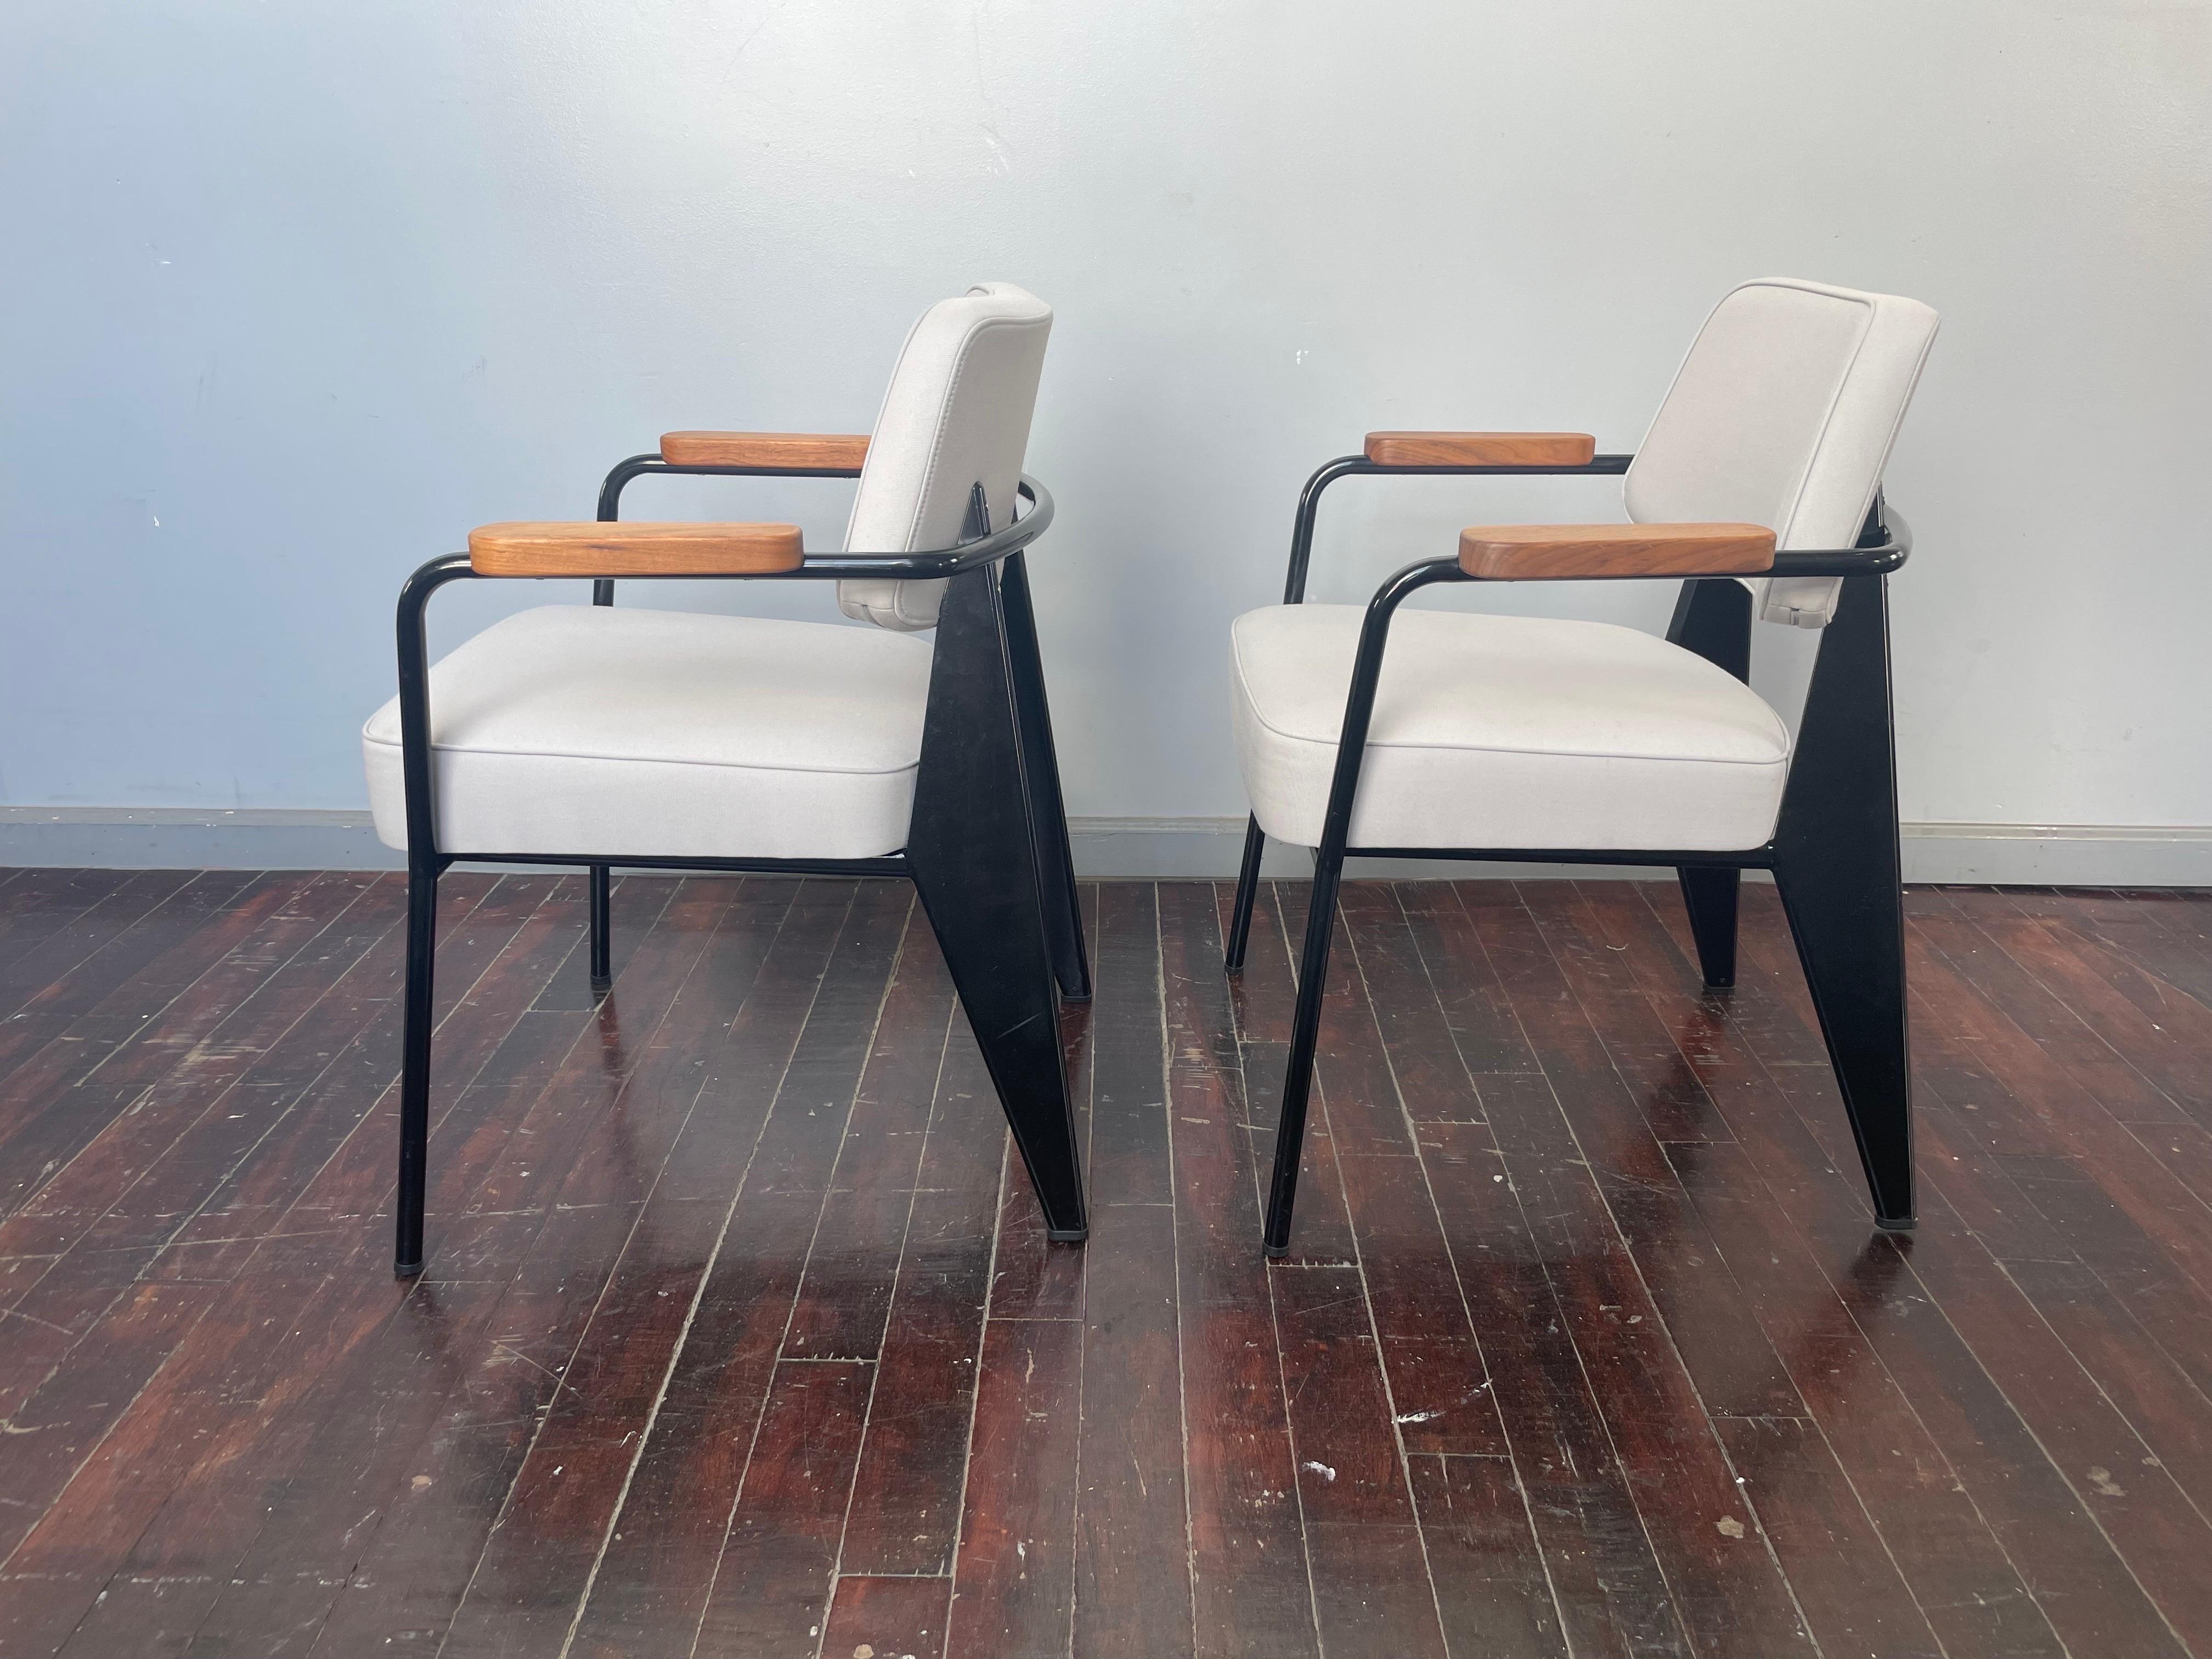 German Set of 4 - Vitra Jean Prouve Fauteuil Direction Chair